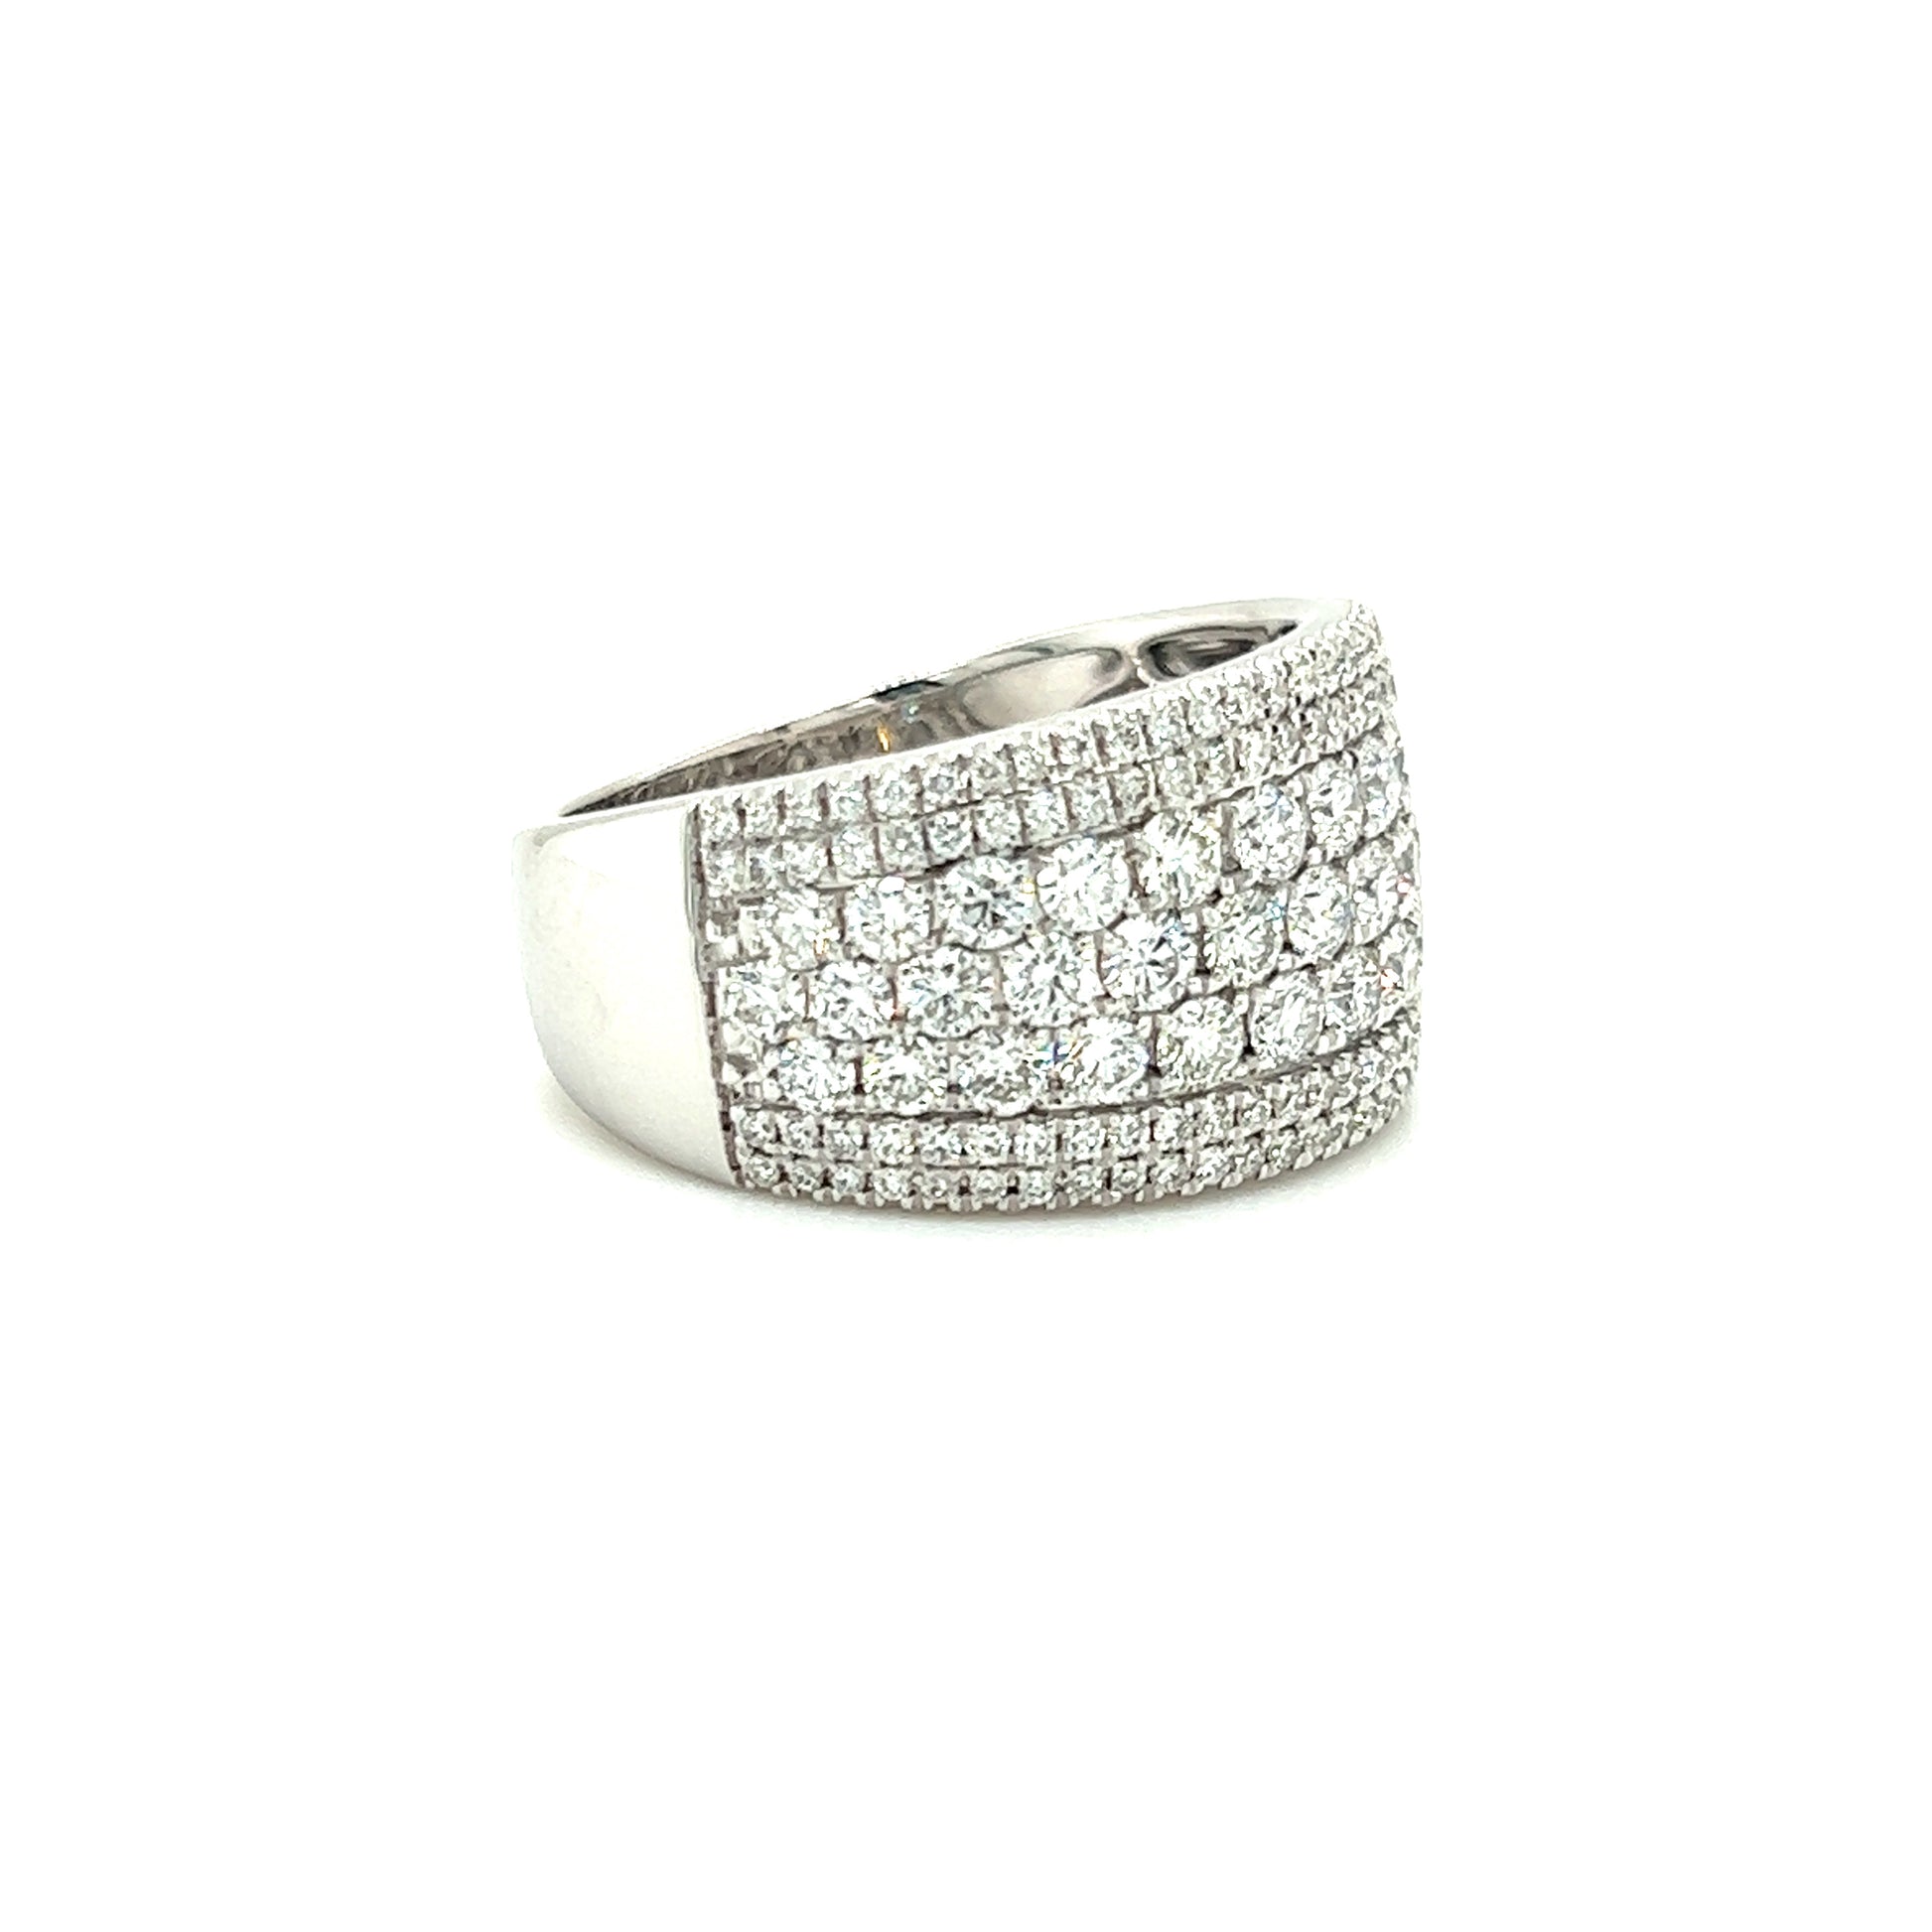 Multi-Row Diamond Ring with 1.9ctw of Diamonds in 14K White Gold Left Side View